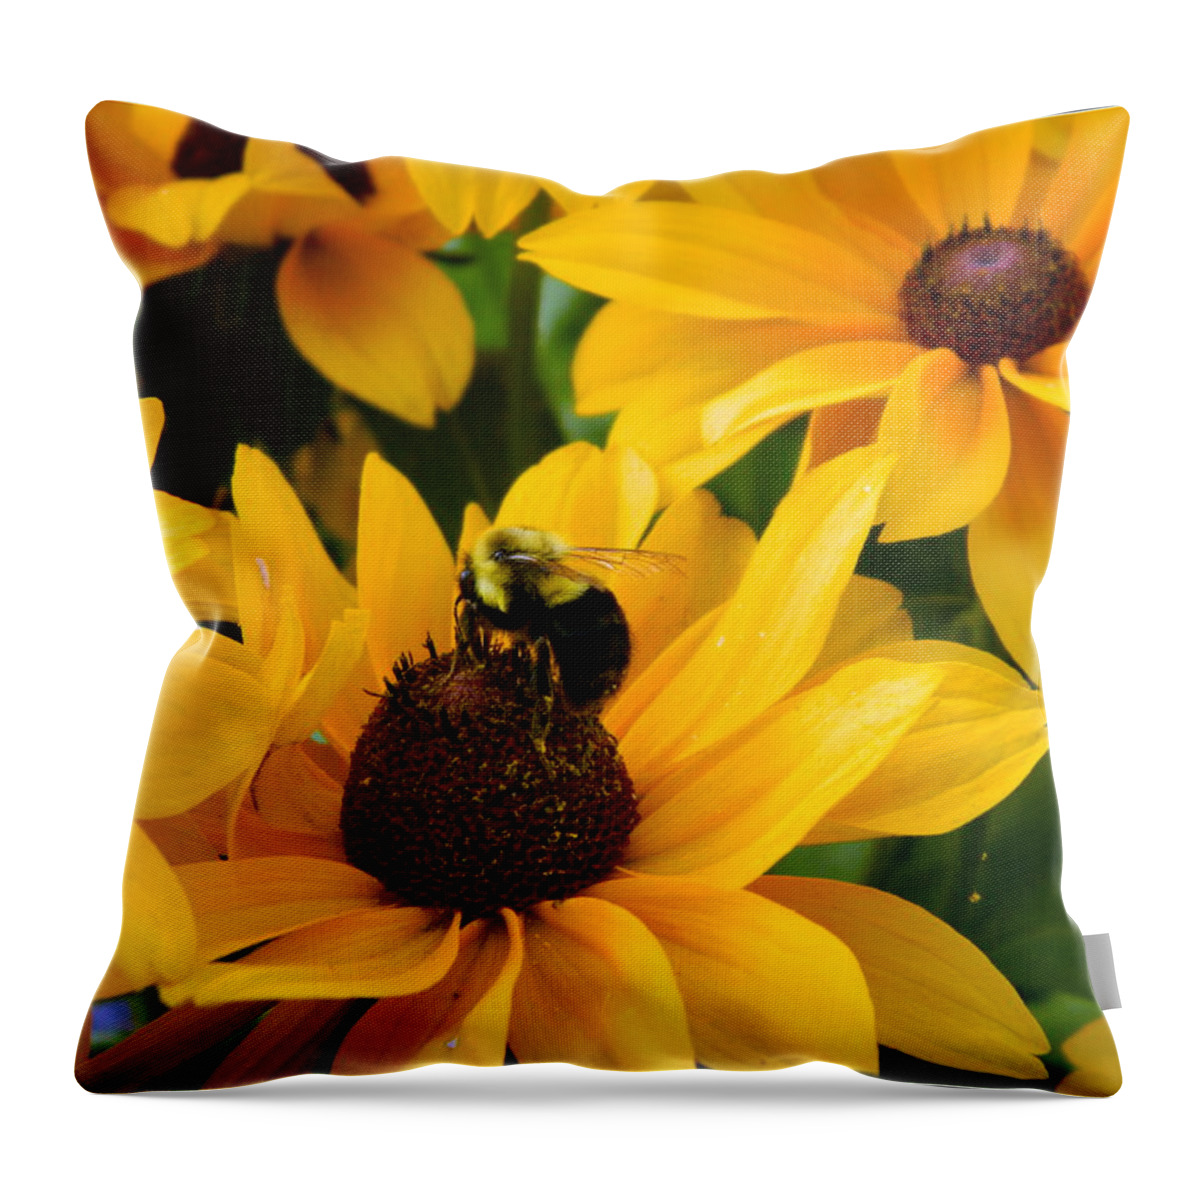 Bee Throw Pillow featuring the photograph Mining Gold by Kathy Barney